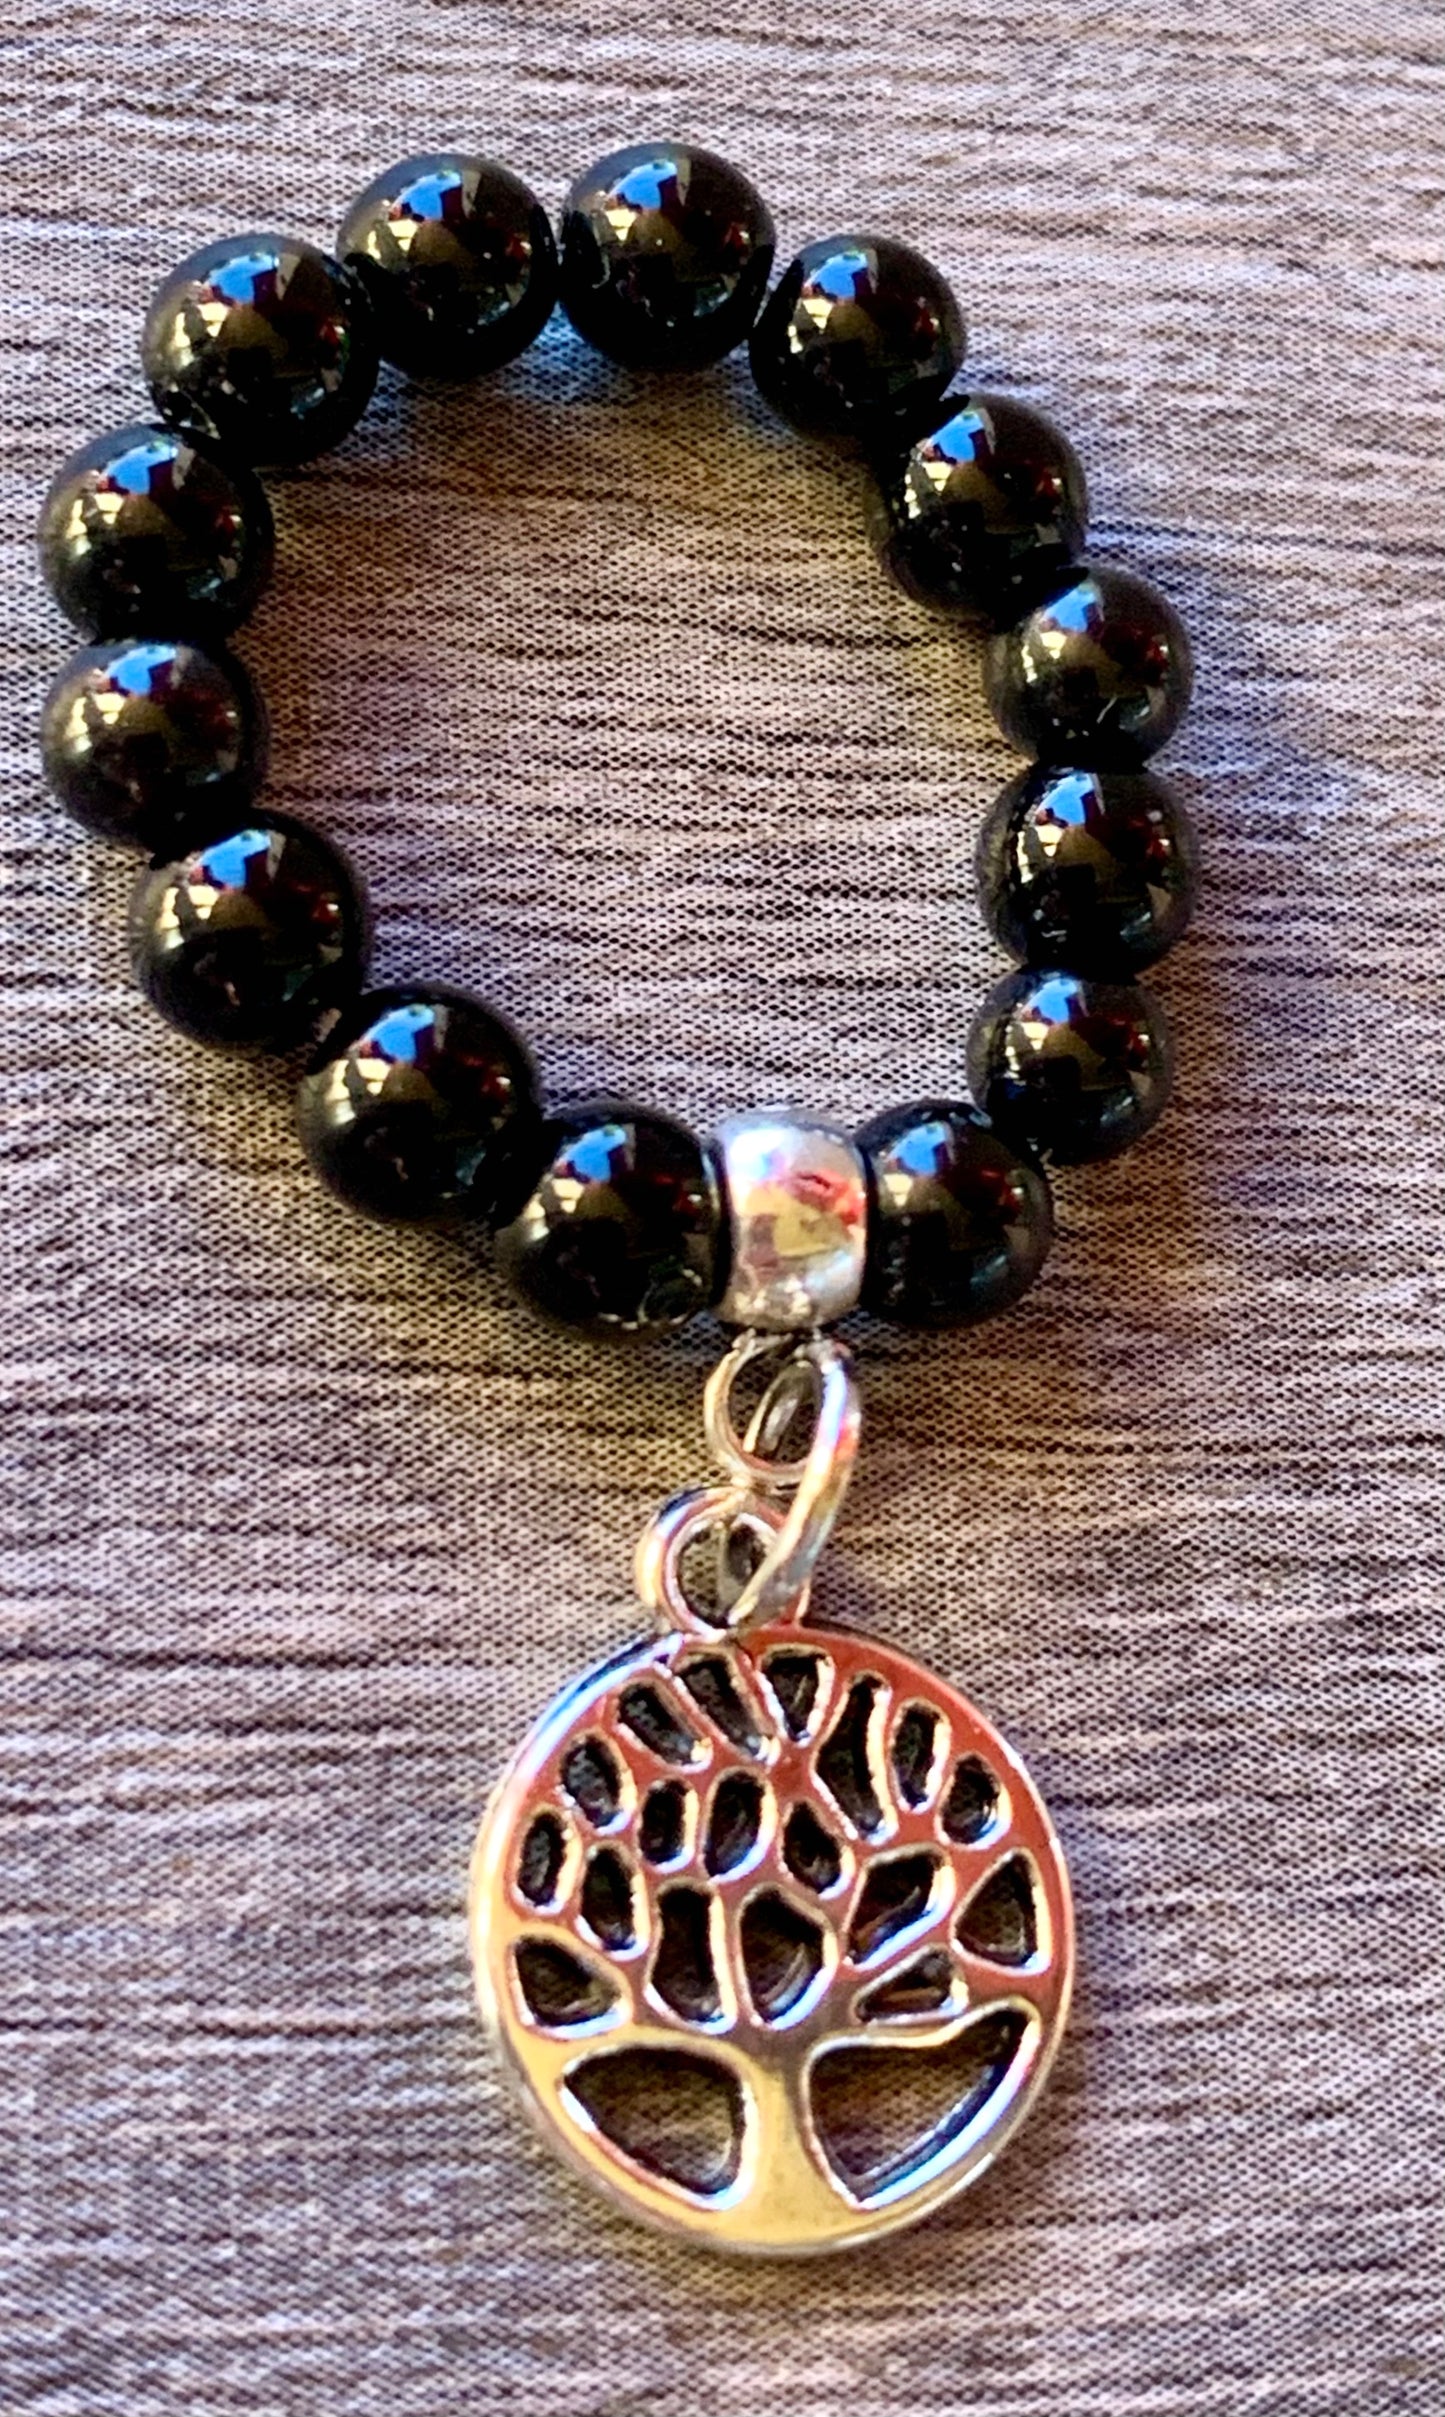 Art Handmade Black Tourmaline Expandable Ring with a Tree of Life Charm